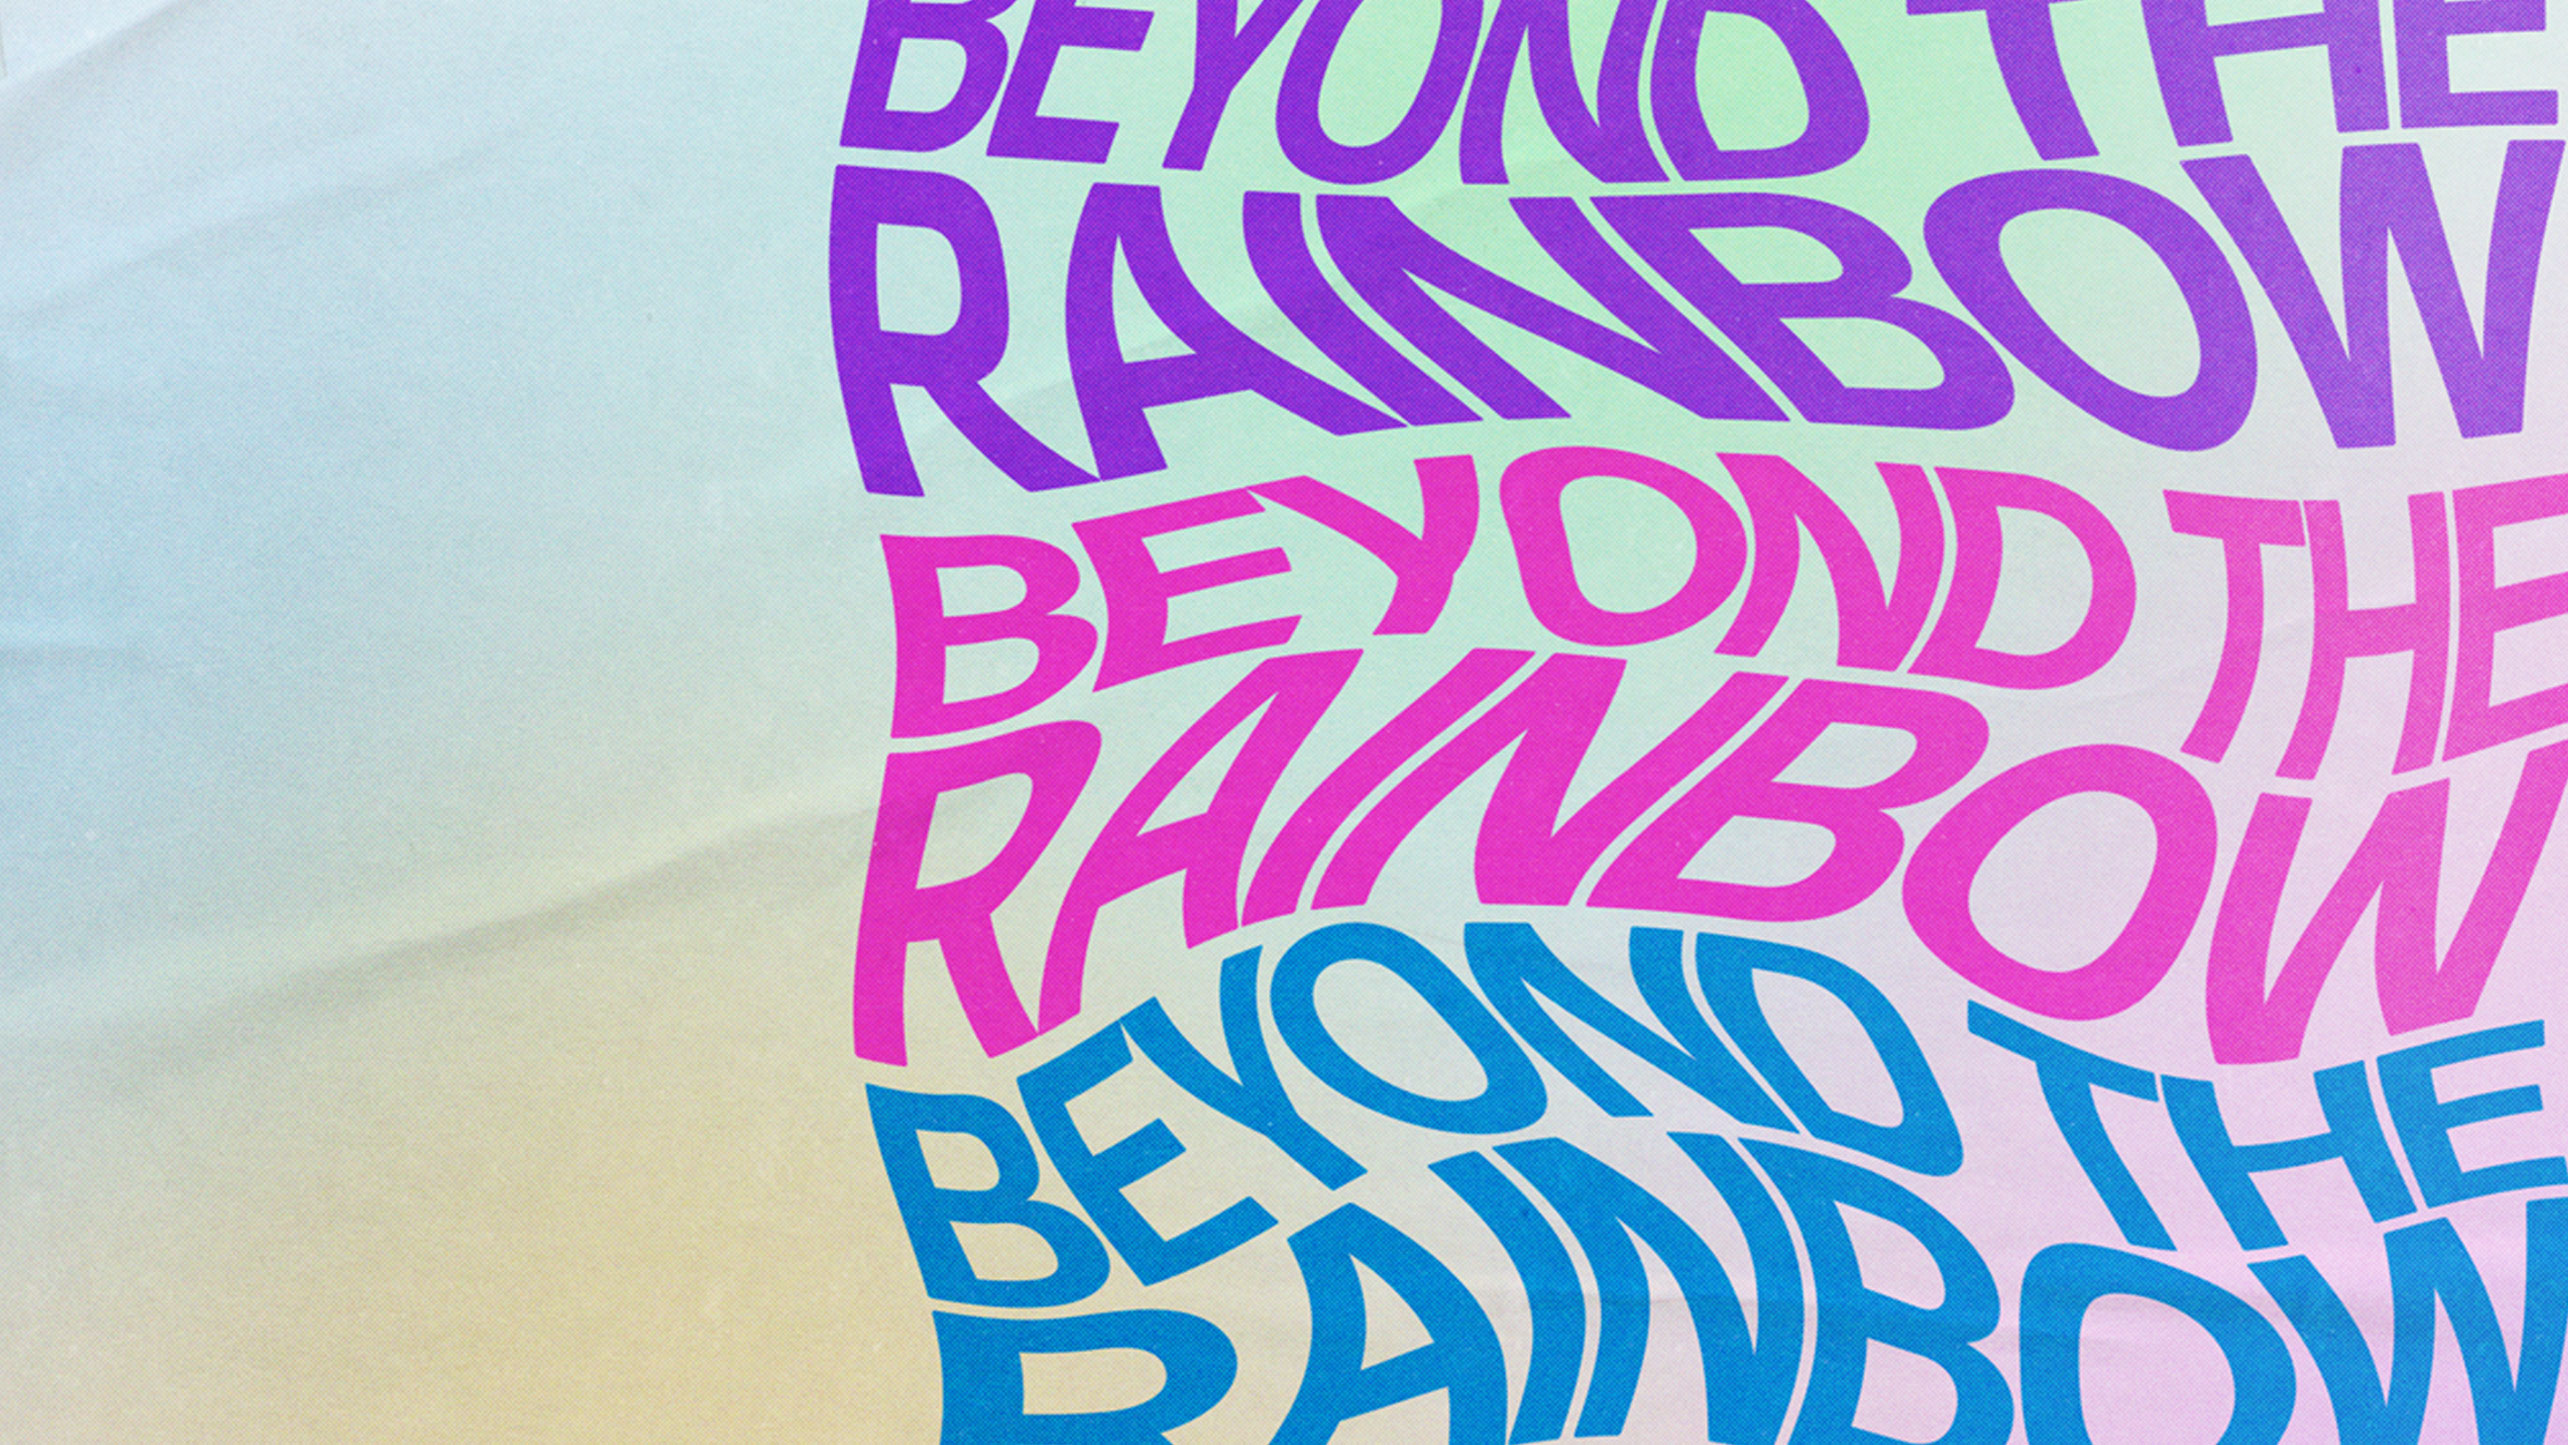 Beyond the Rainbow report cover